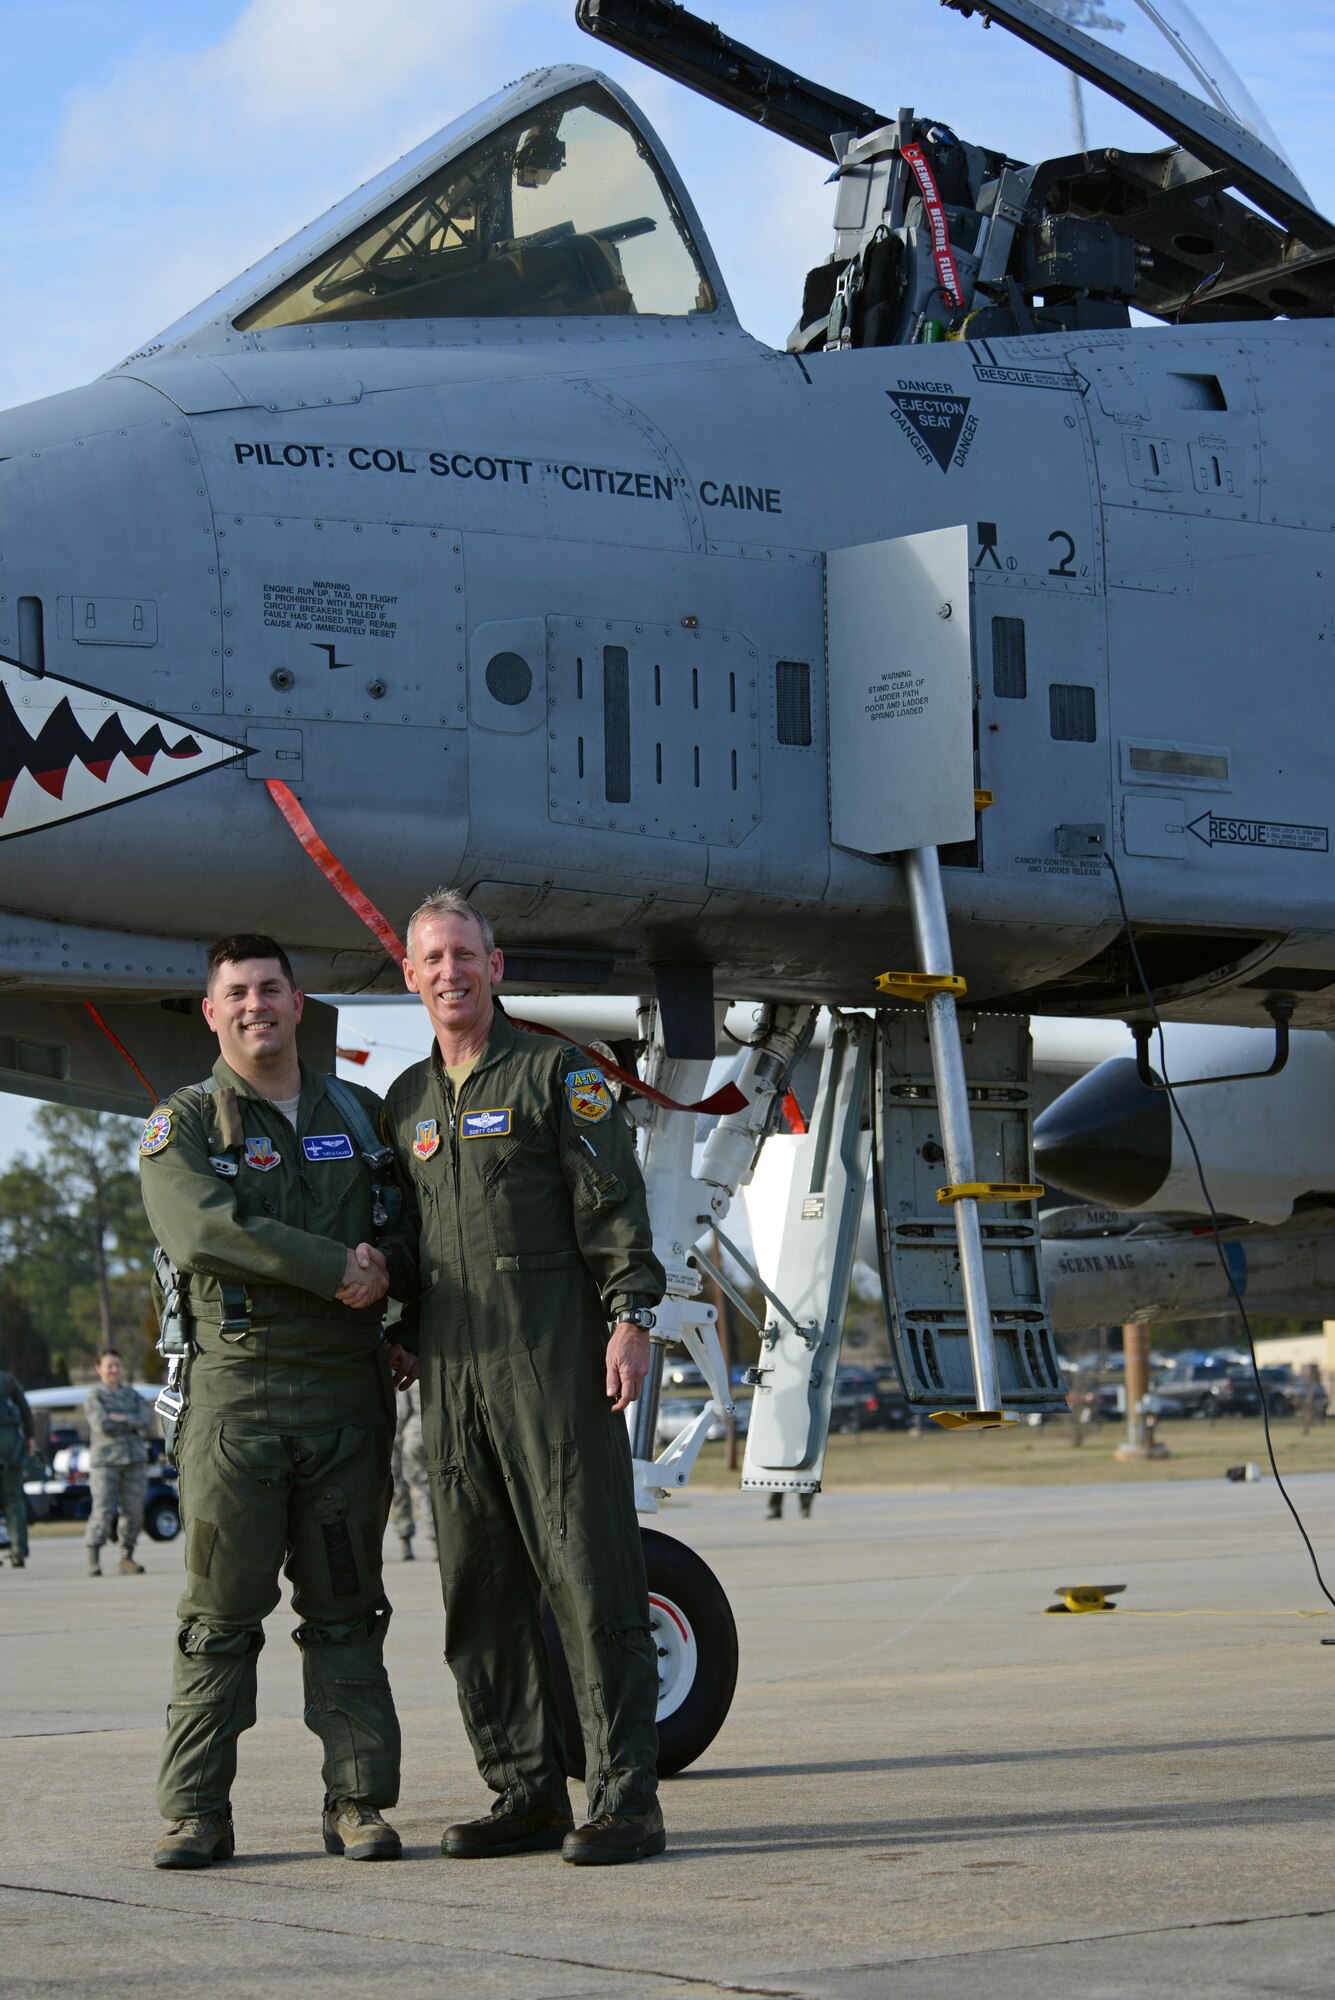 U.S. Air Force Capt. Eric Calvey (left), 74th Fighter Squadron A-10 instructor and chief of weapons, and Col. Scott Caine (right), 9th Air Force vice commander, stand in front of an A-10C Thunderbolt II following Caine’s final flight in the Air Force, Shaw Air Force Base, S.C., Feb. 8, 2017. Calvey acted as a wingman during Caine’s final flight that marked the end of the vice commander’s 30 years of service. (U.S. Air Force photo by Airman 1st Class Kathryn R.C. Reaves)